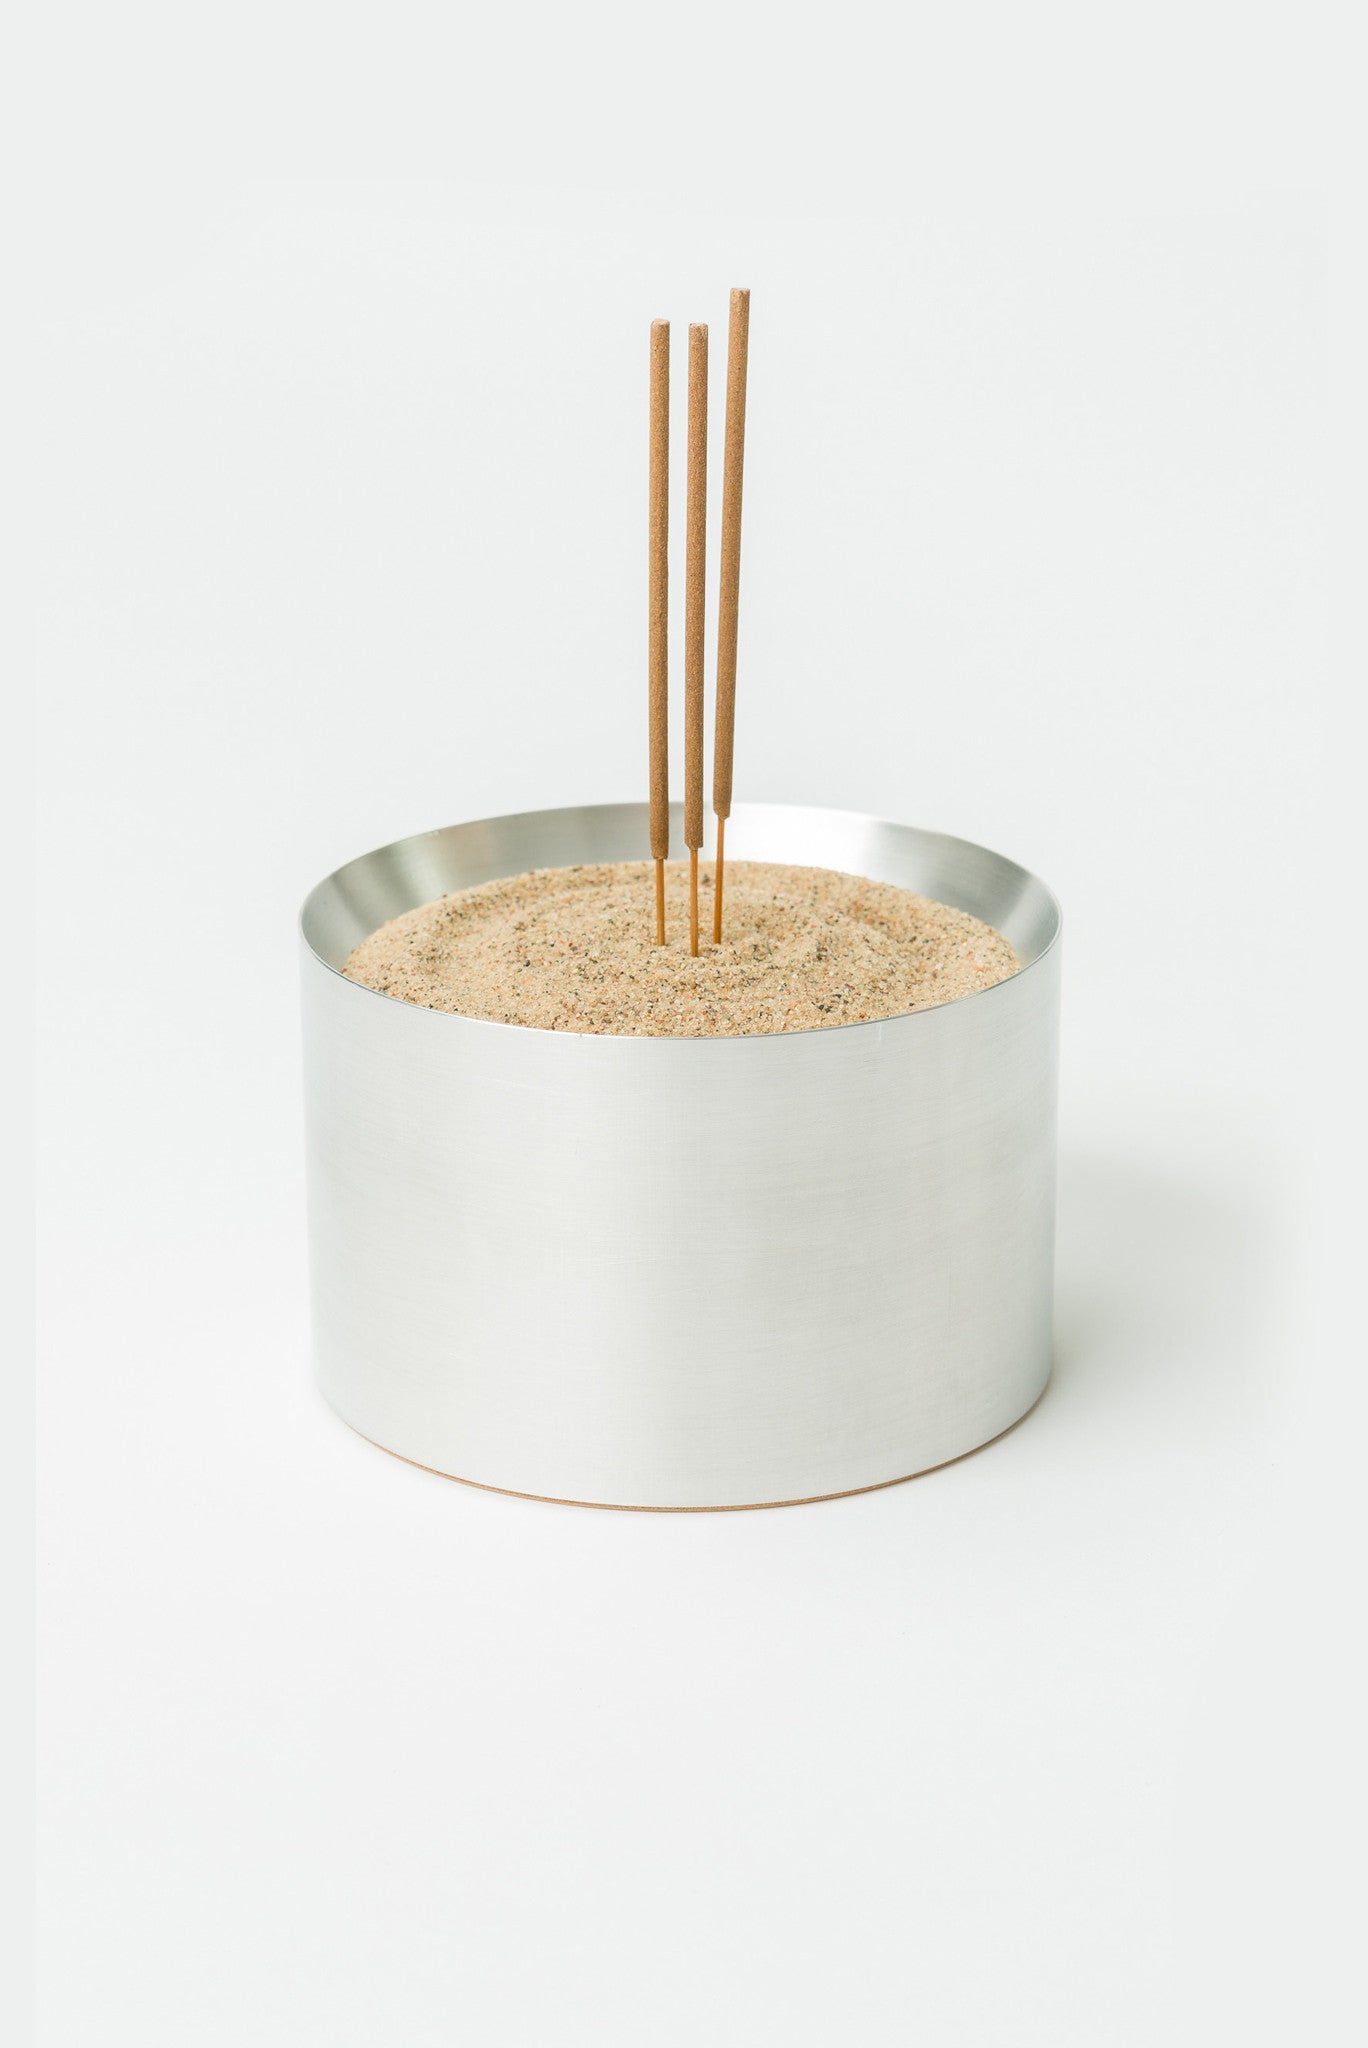 Sand Incense Bowl in Solid Aluminum